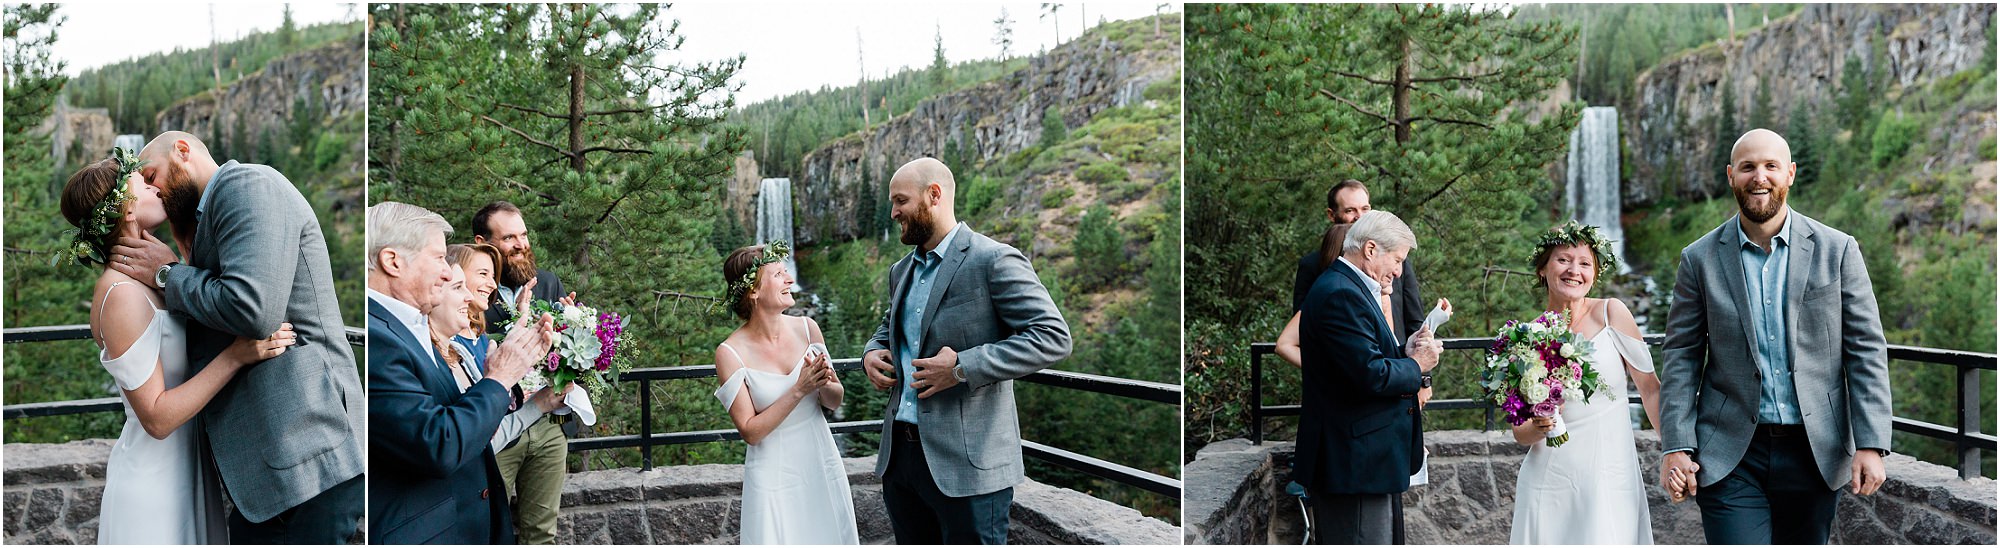 A couple kisses and celebrates by throwing their arms in the air, bouquet in hand after their intimate ceremony for their Tumalo Falls elopement in Oregon. | Erica Swantek Photography